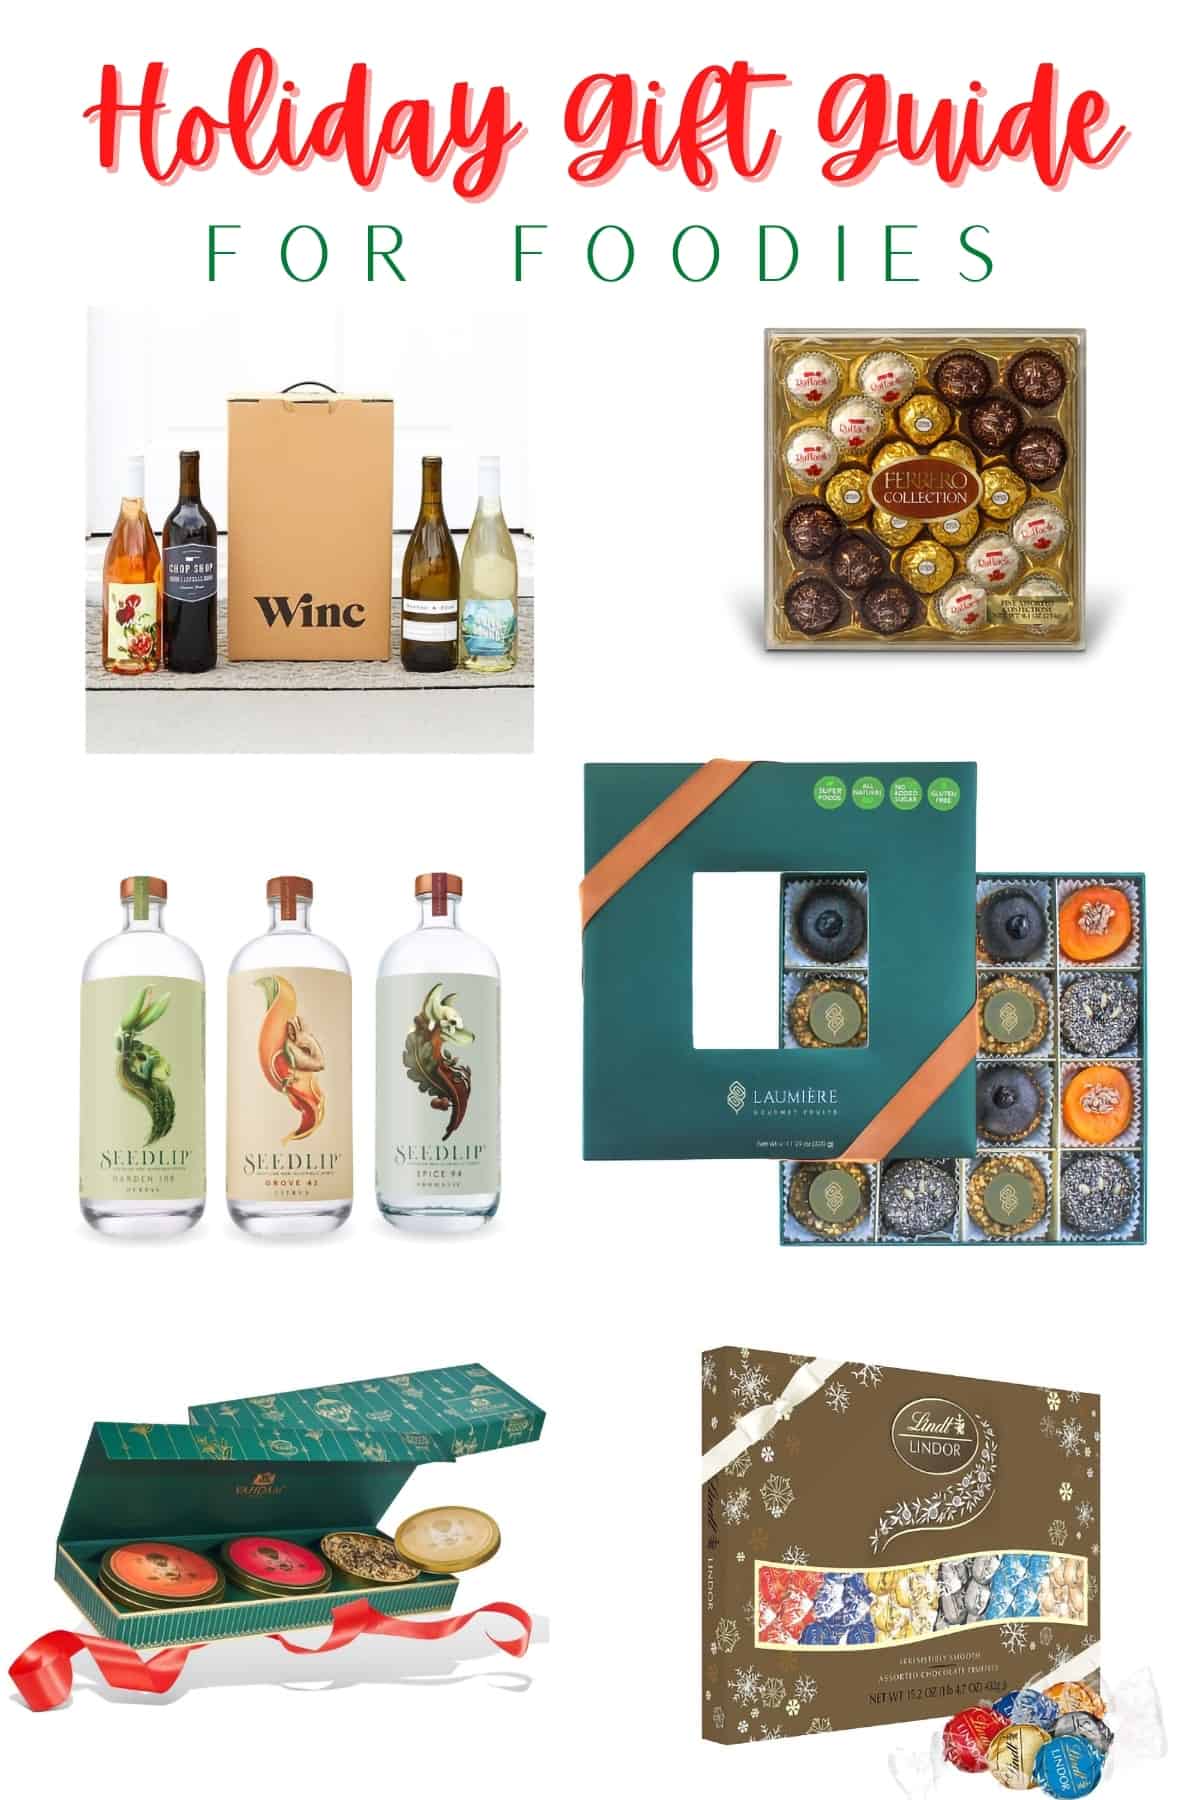 Your 2020 Holiday Gift Guide for Foodies